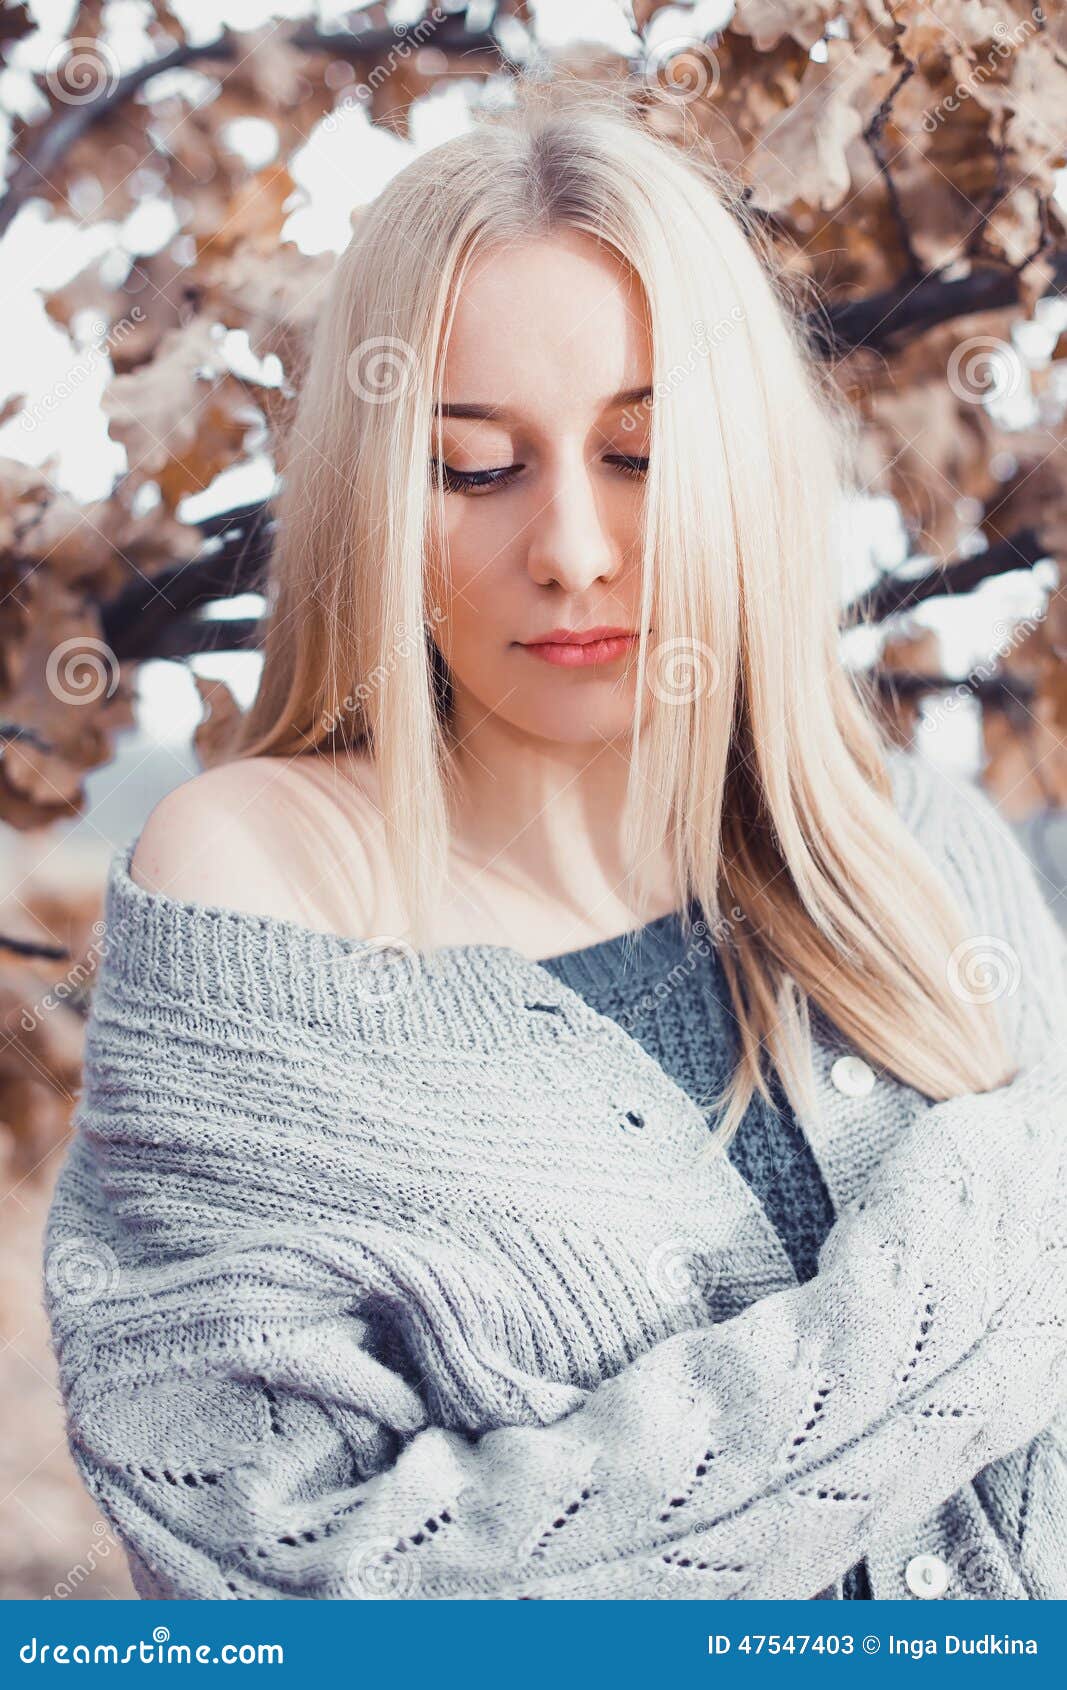 Woman in a sweater stock image. Image of fresh, cosmetics - 47547403